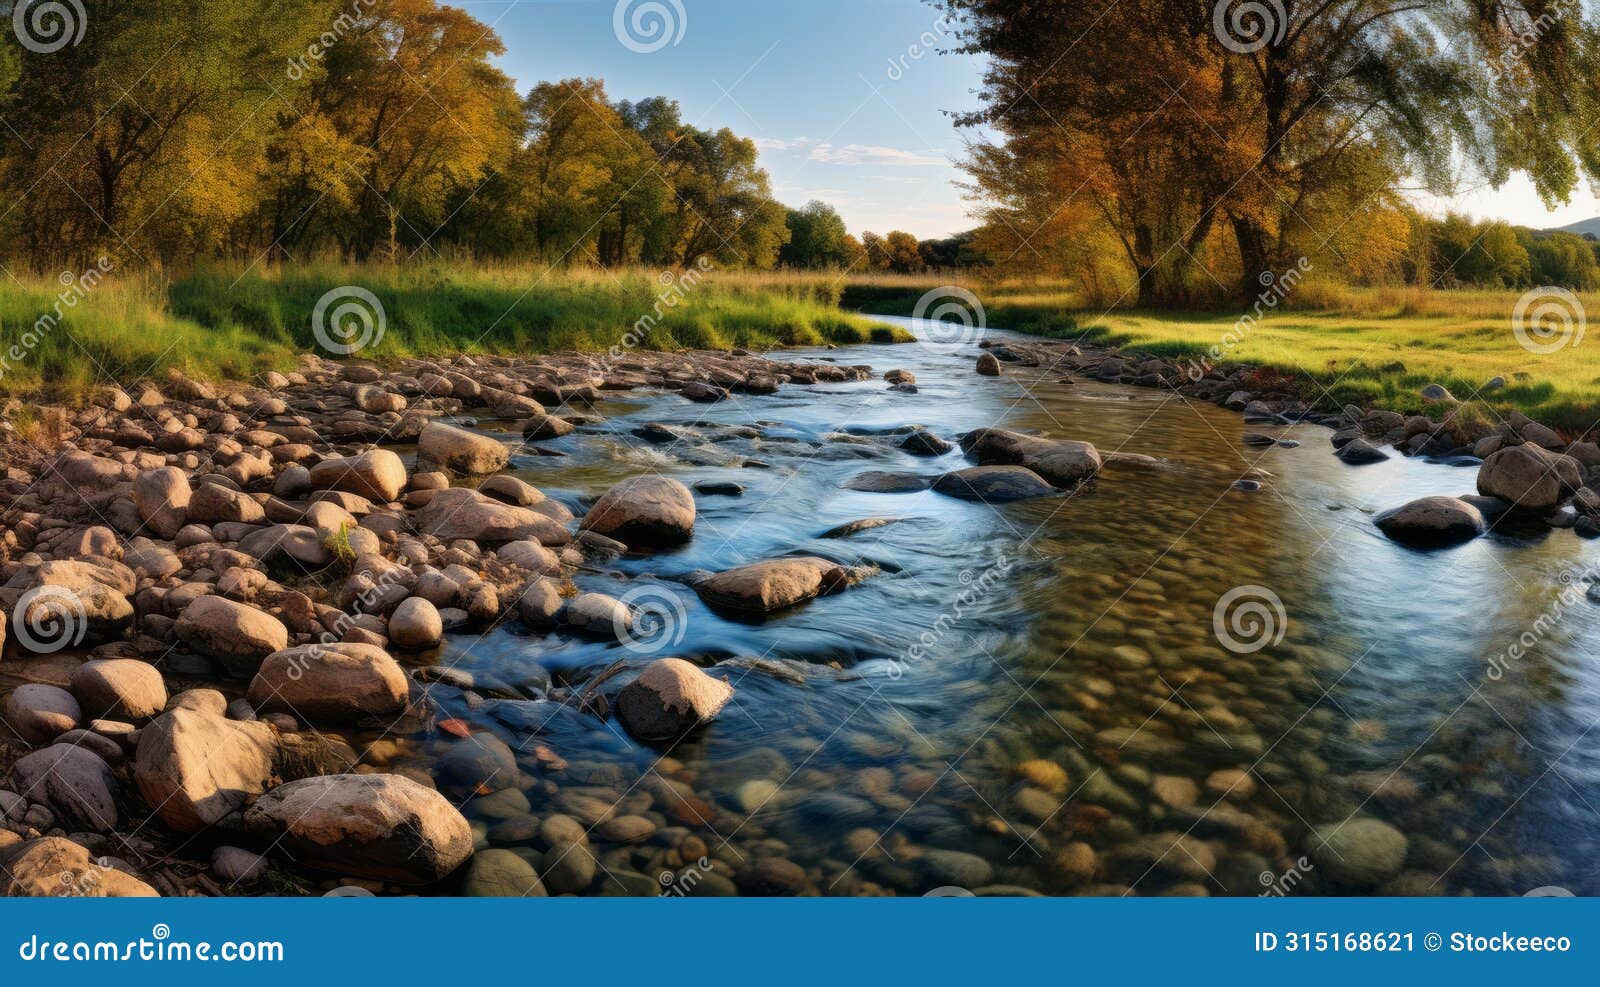 award-winning 32k hdr photography: pasture stream and small river stones